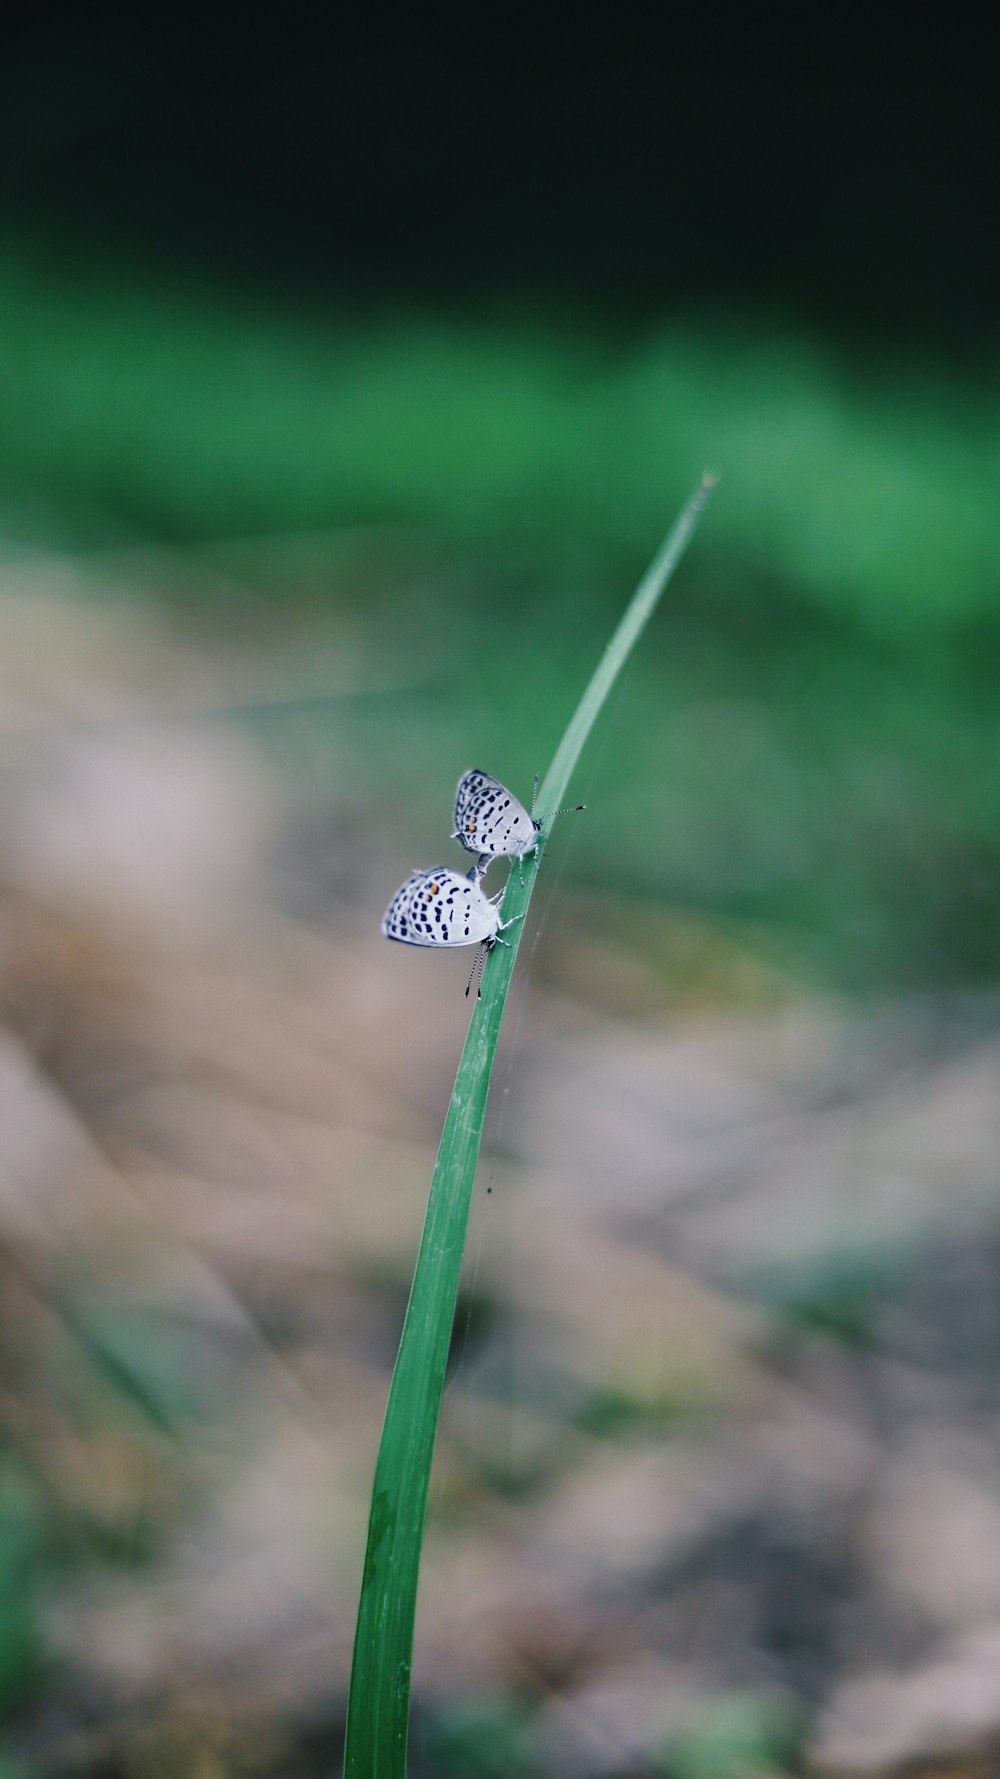 two white butterflies on grass blade